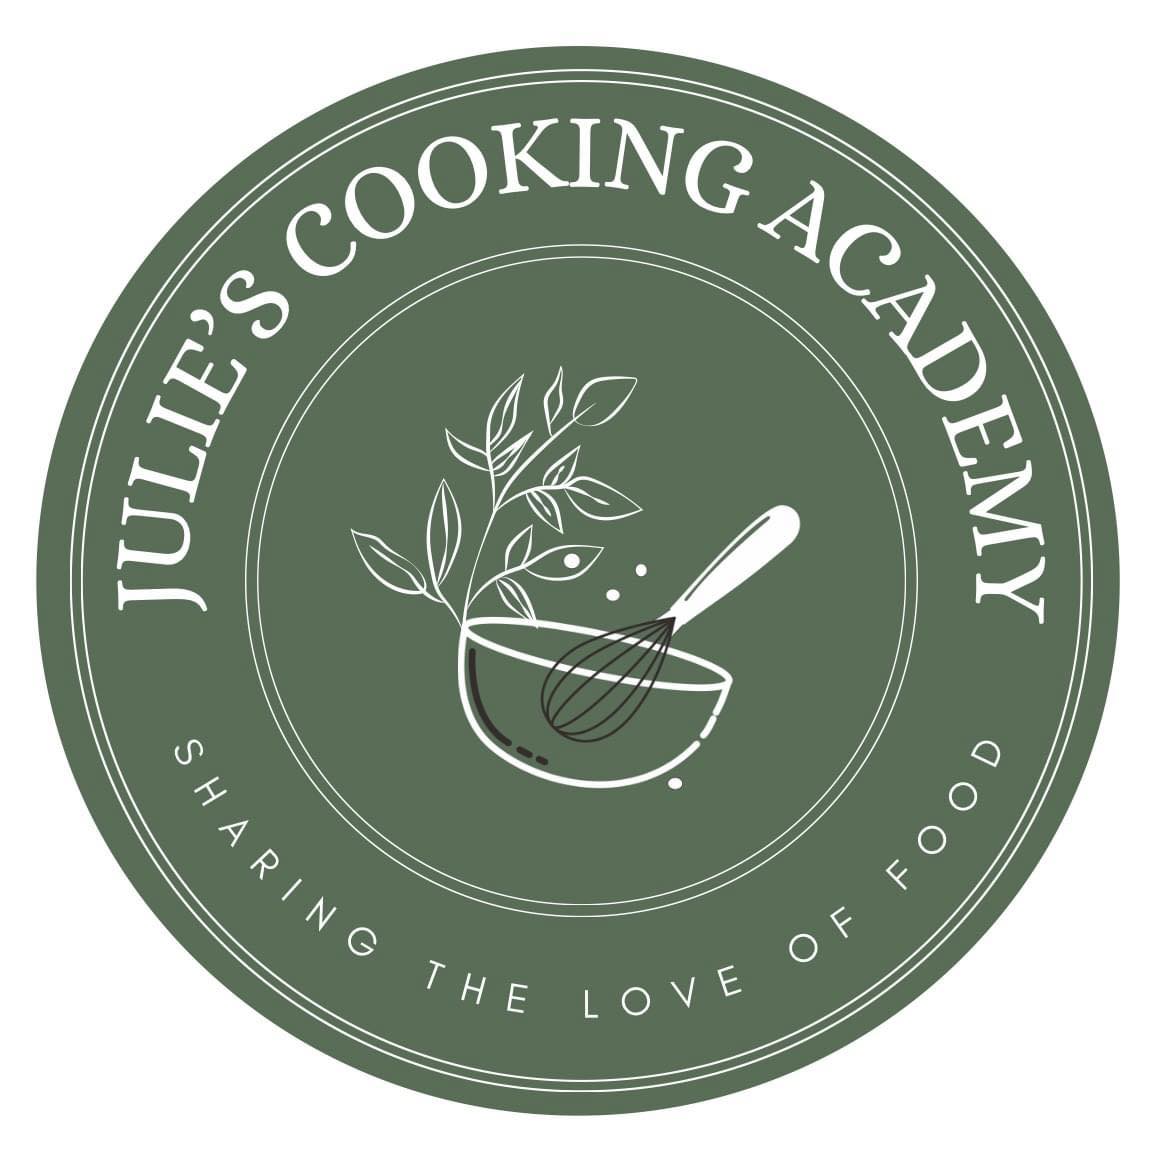 Julie's Cooking Academy - Passionate about sharing the love of food